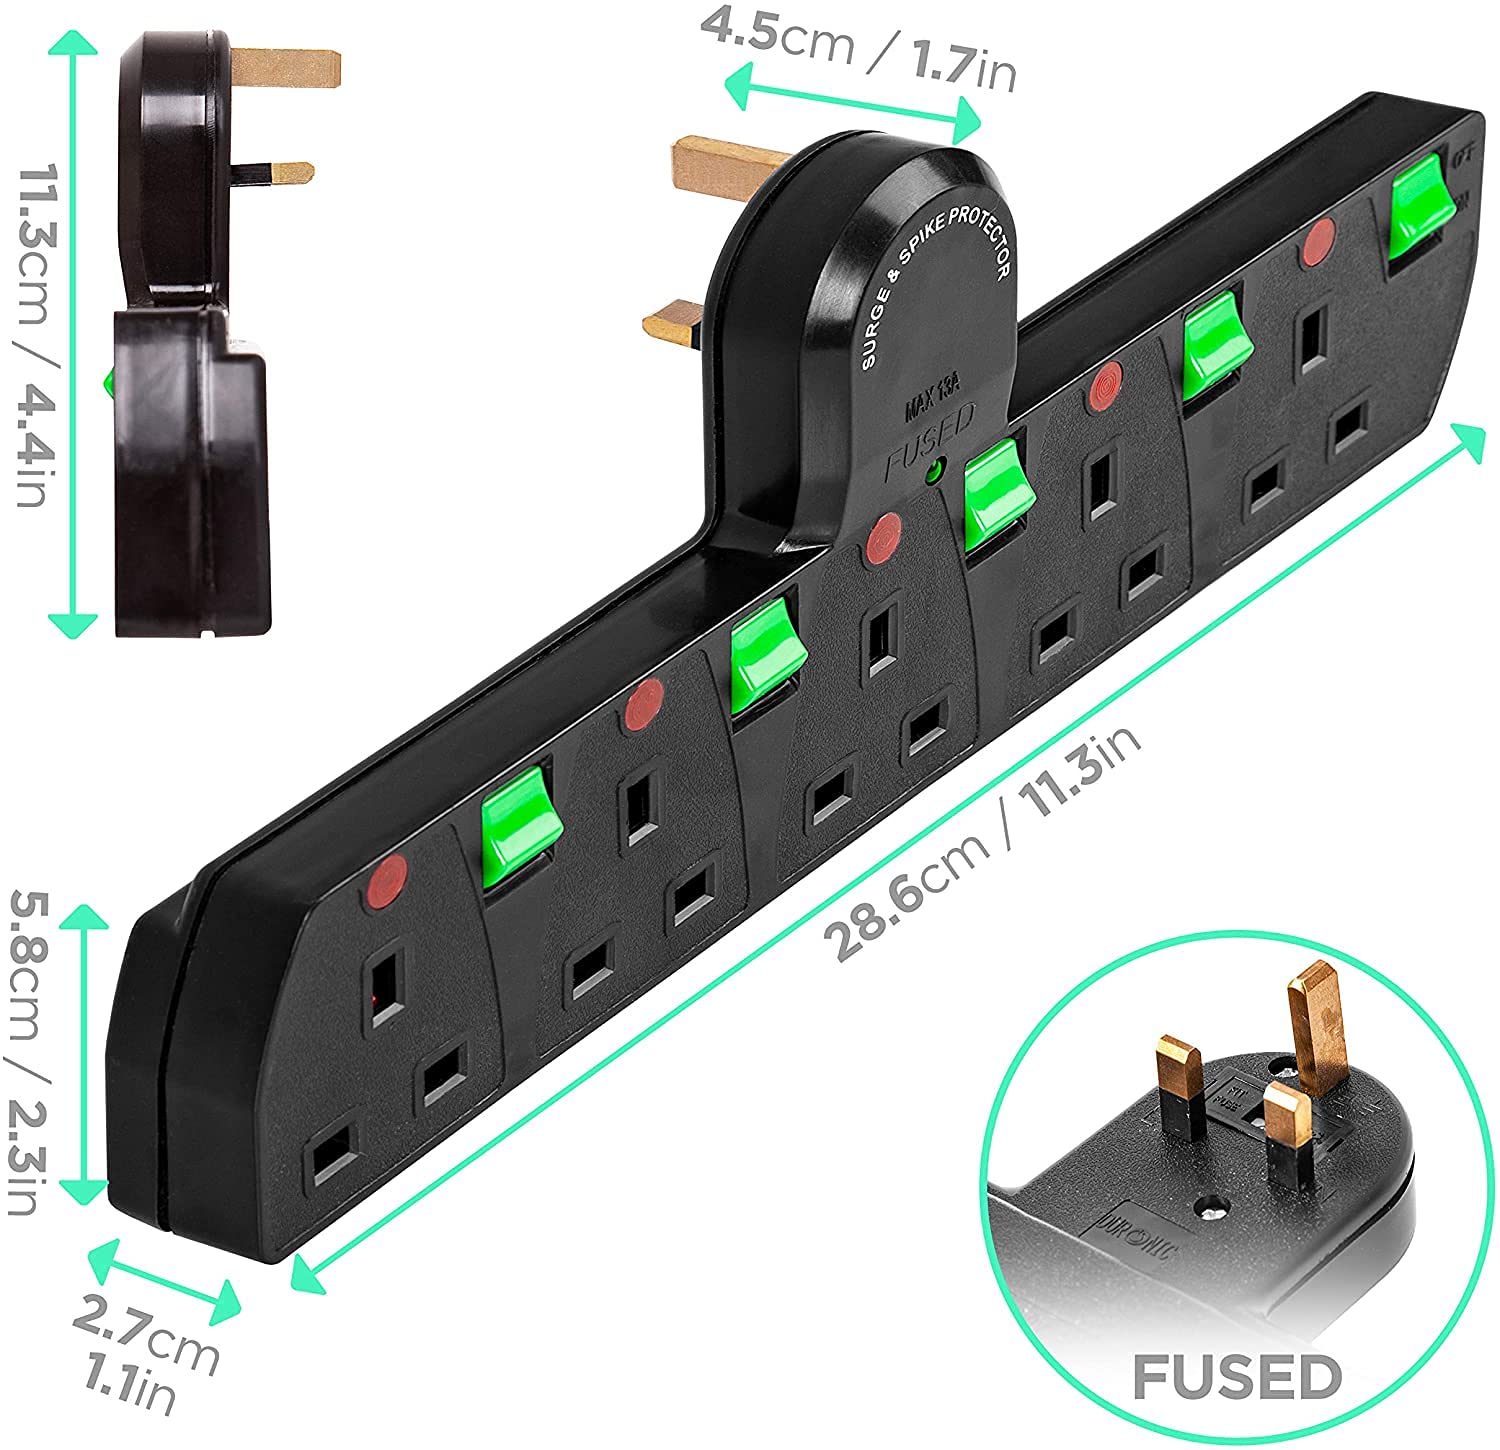 Duronic Plug Adaptor Power Extension Multi Socket Surge Protected S125B 5 Way UK | Switched | Black | Switches Turns 1 Socket Into 5